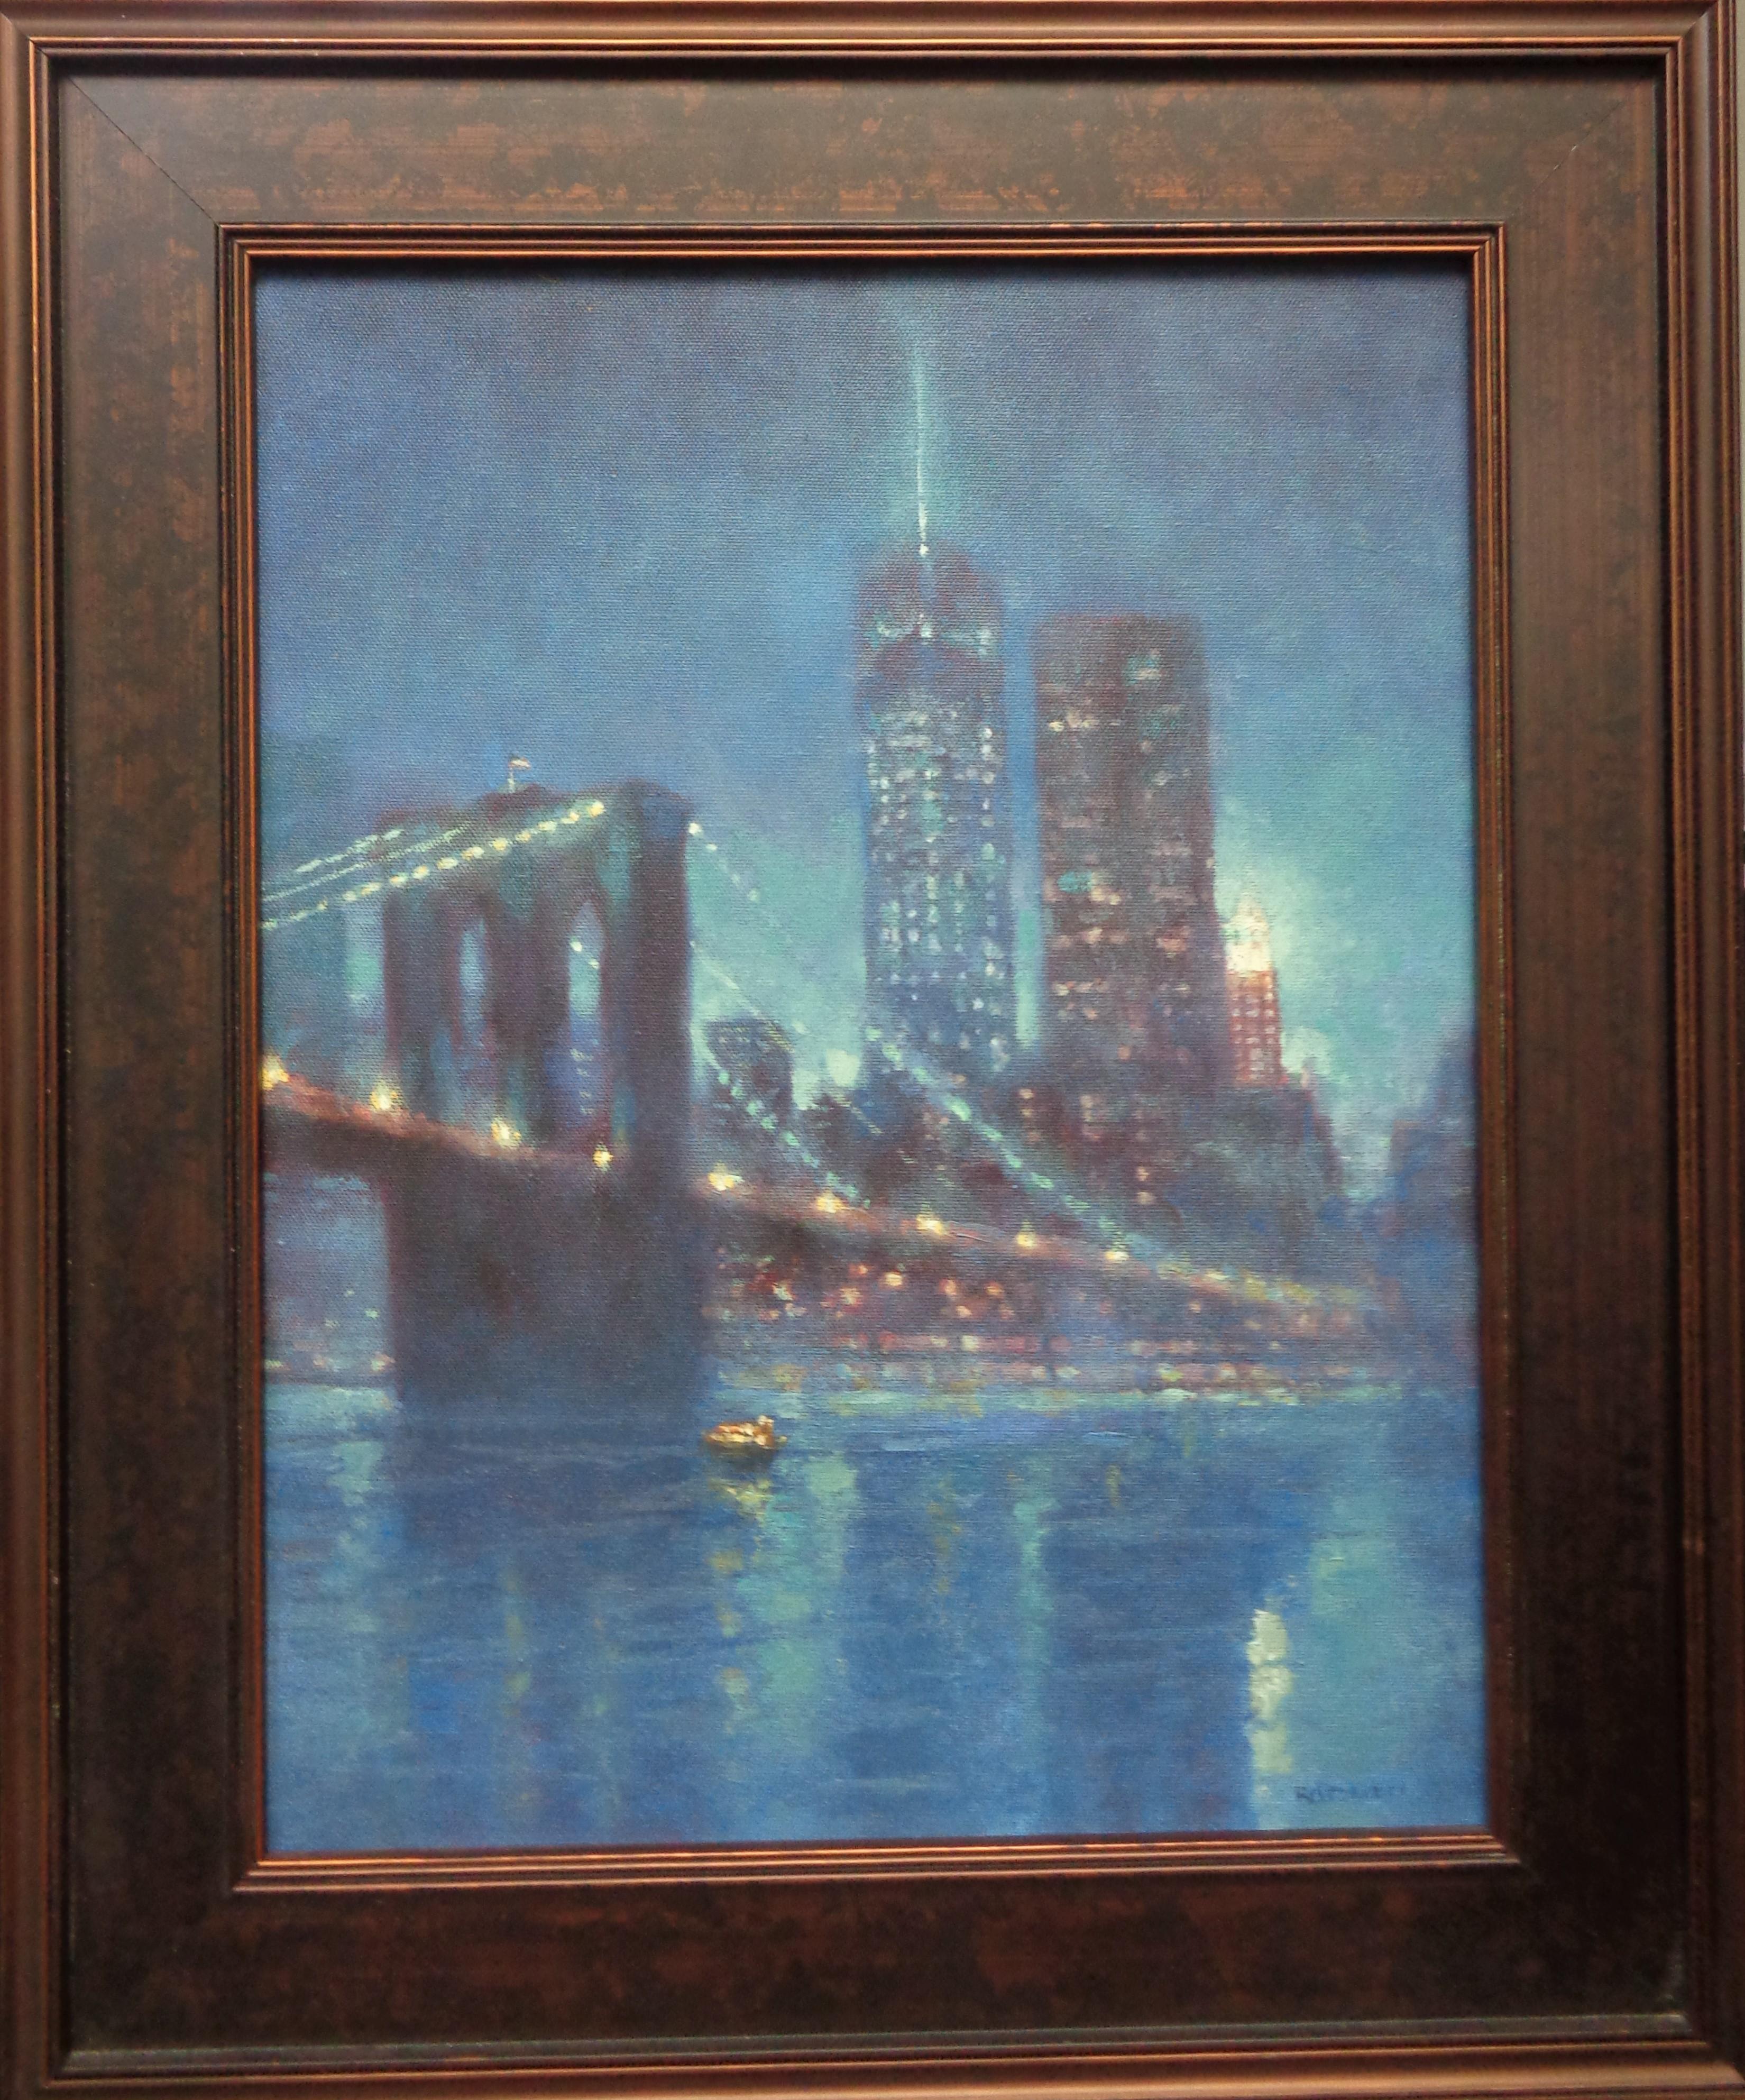 Mystical Evening, Freedom Tower, NYC, is an oil painting on canvas by award winning contemporary artist Michael Budden that showcases the new Freedom Tower in lower Manhattan on a misty evening. The image is 18 x 14 and 23.5 x 19.5 framed. 